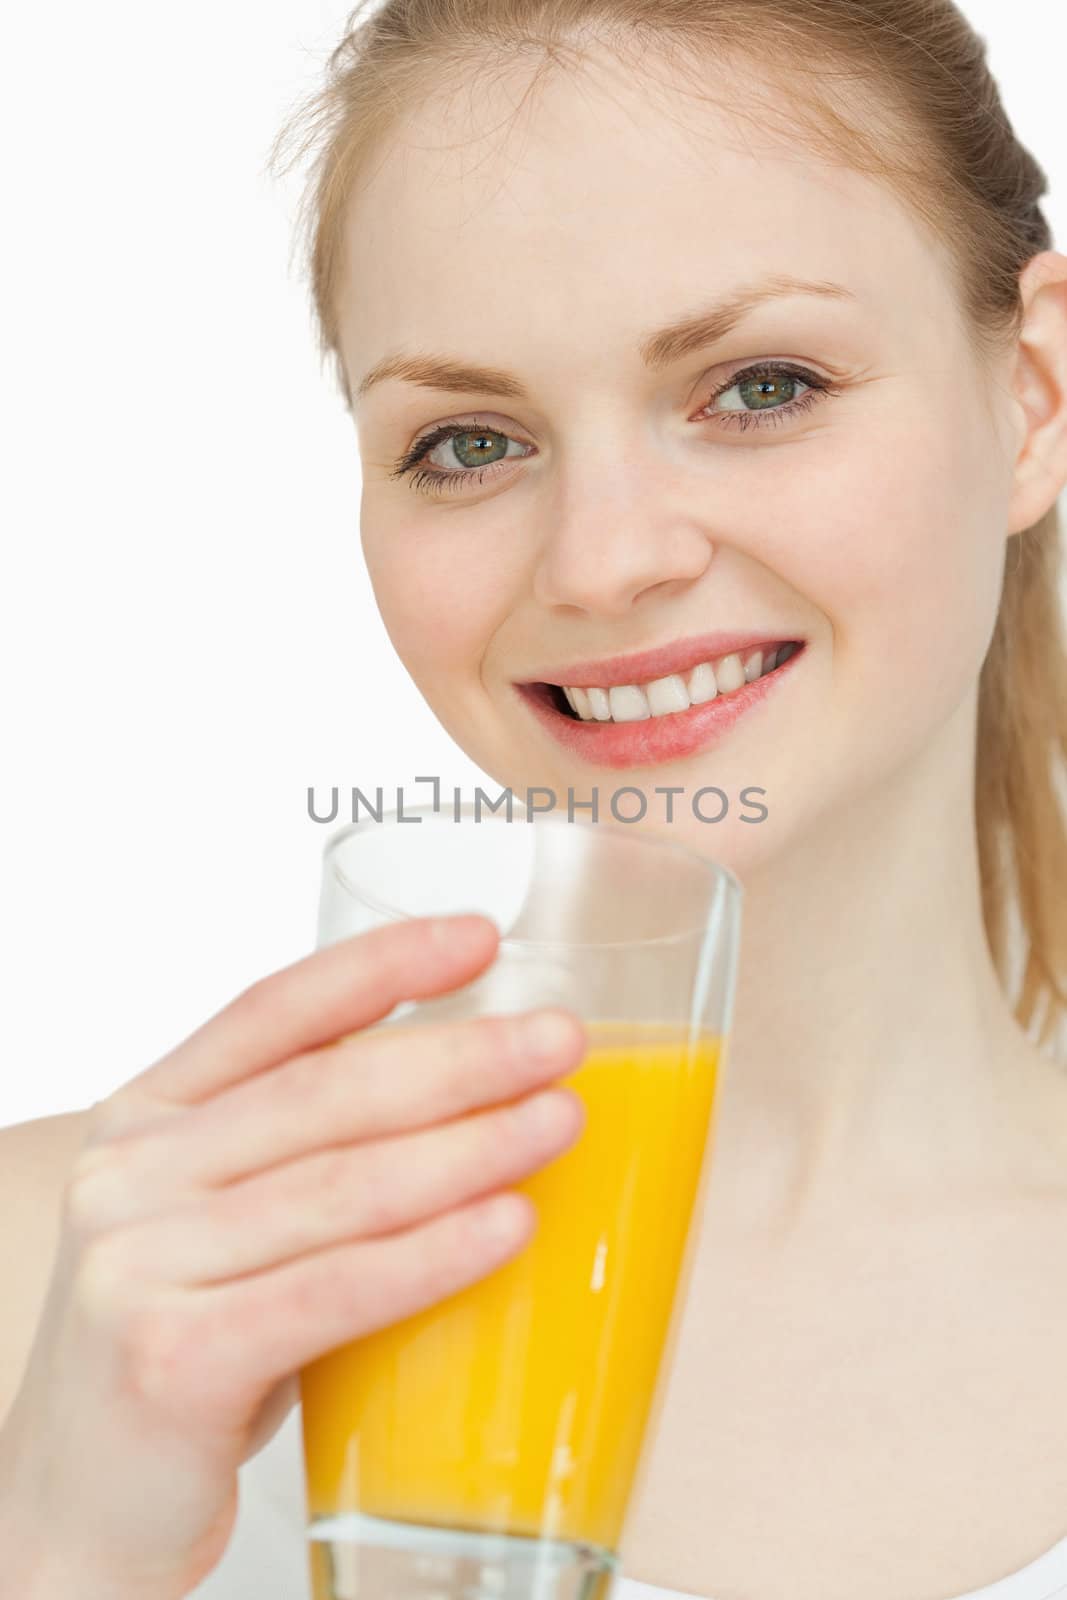 Cheerful woman holding a glass of orange juice against white background